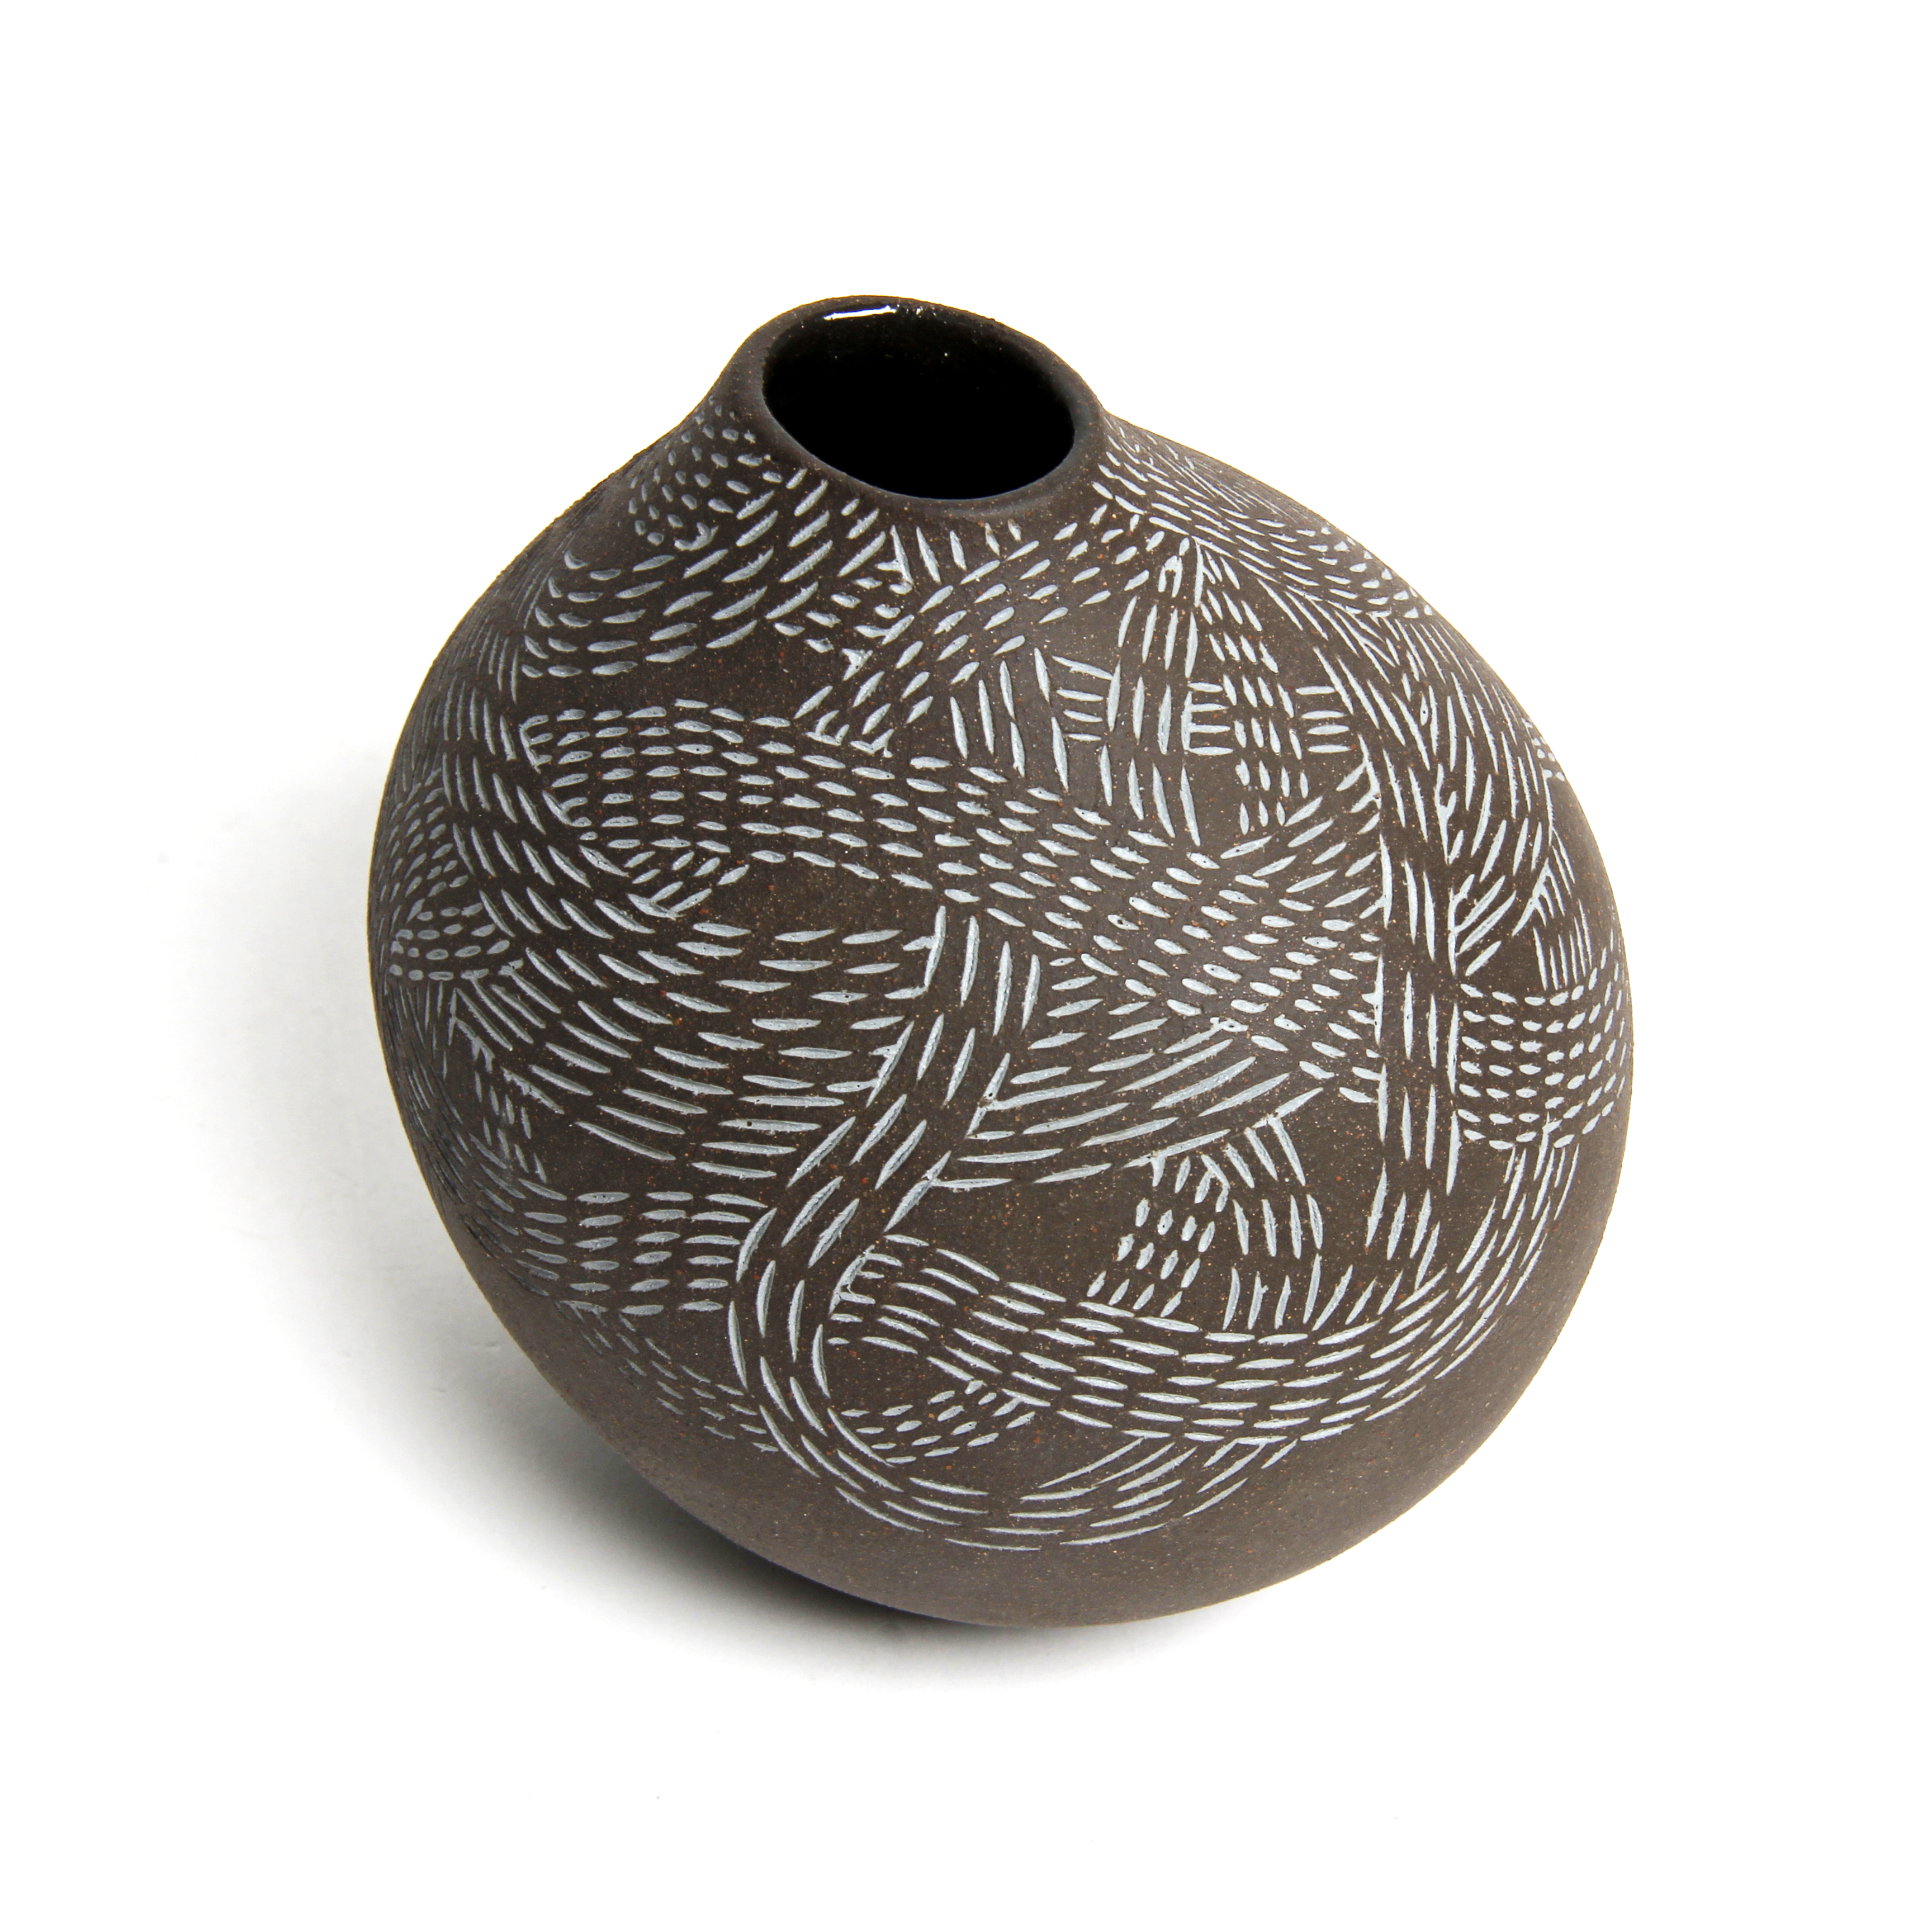 Talia Silva: Small Black and Blue Inlay Vessel (Each sold separately) Product Image 3 of 5